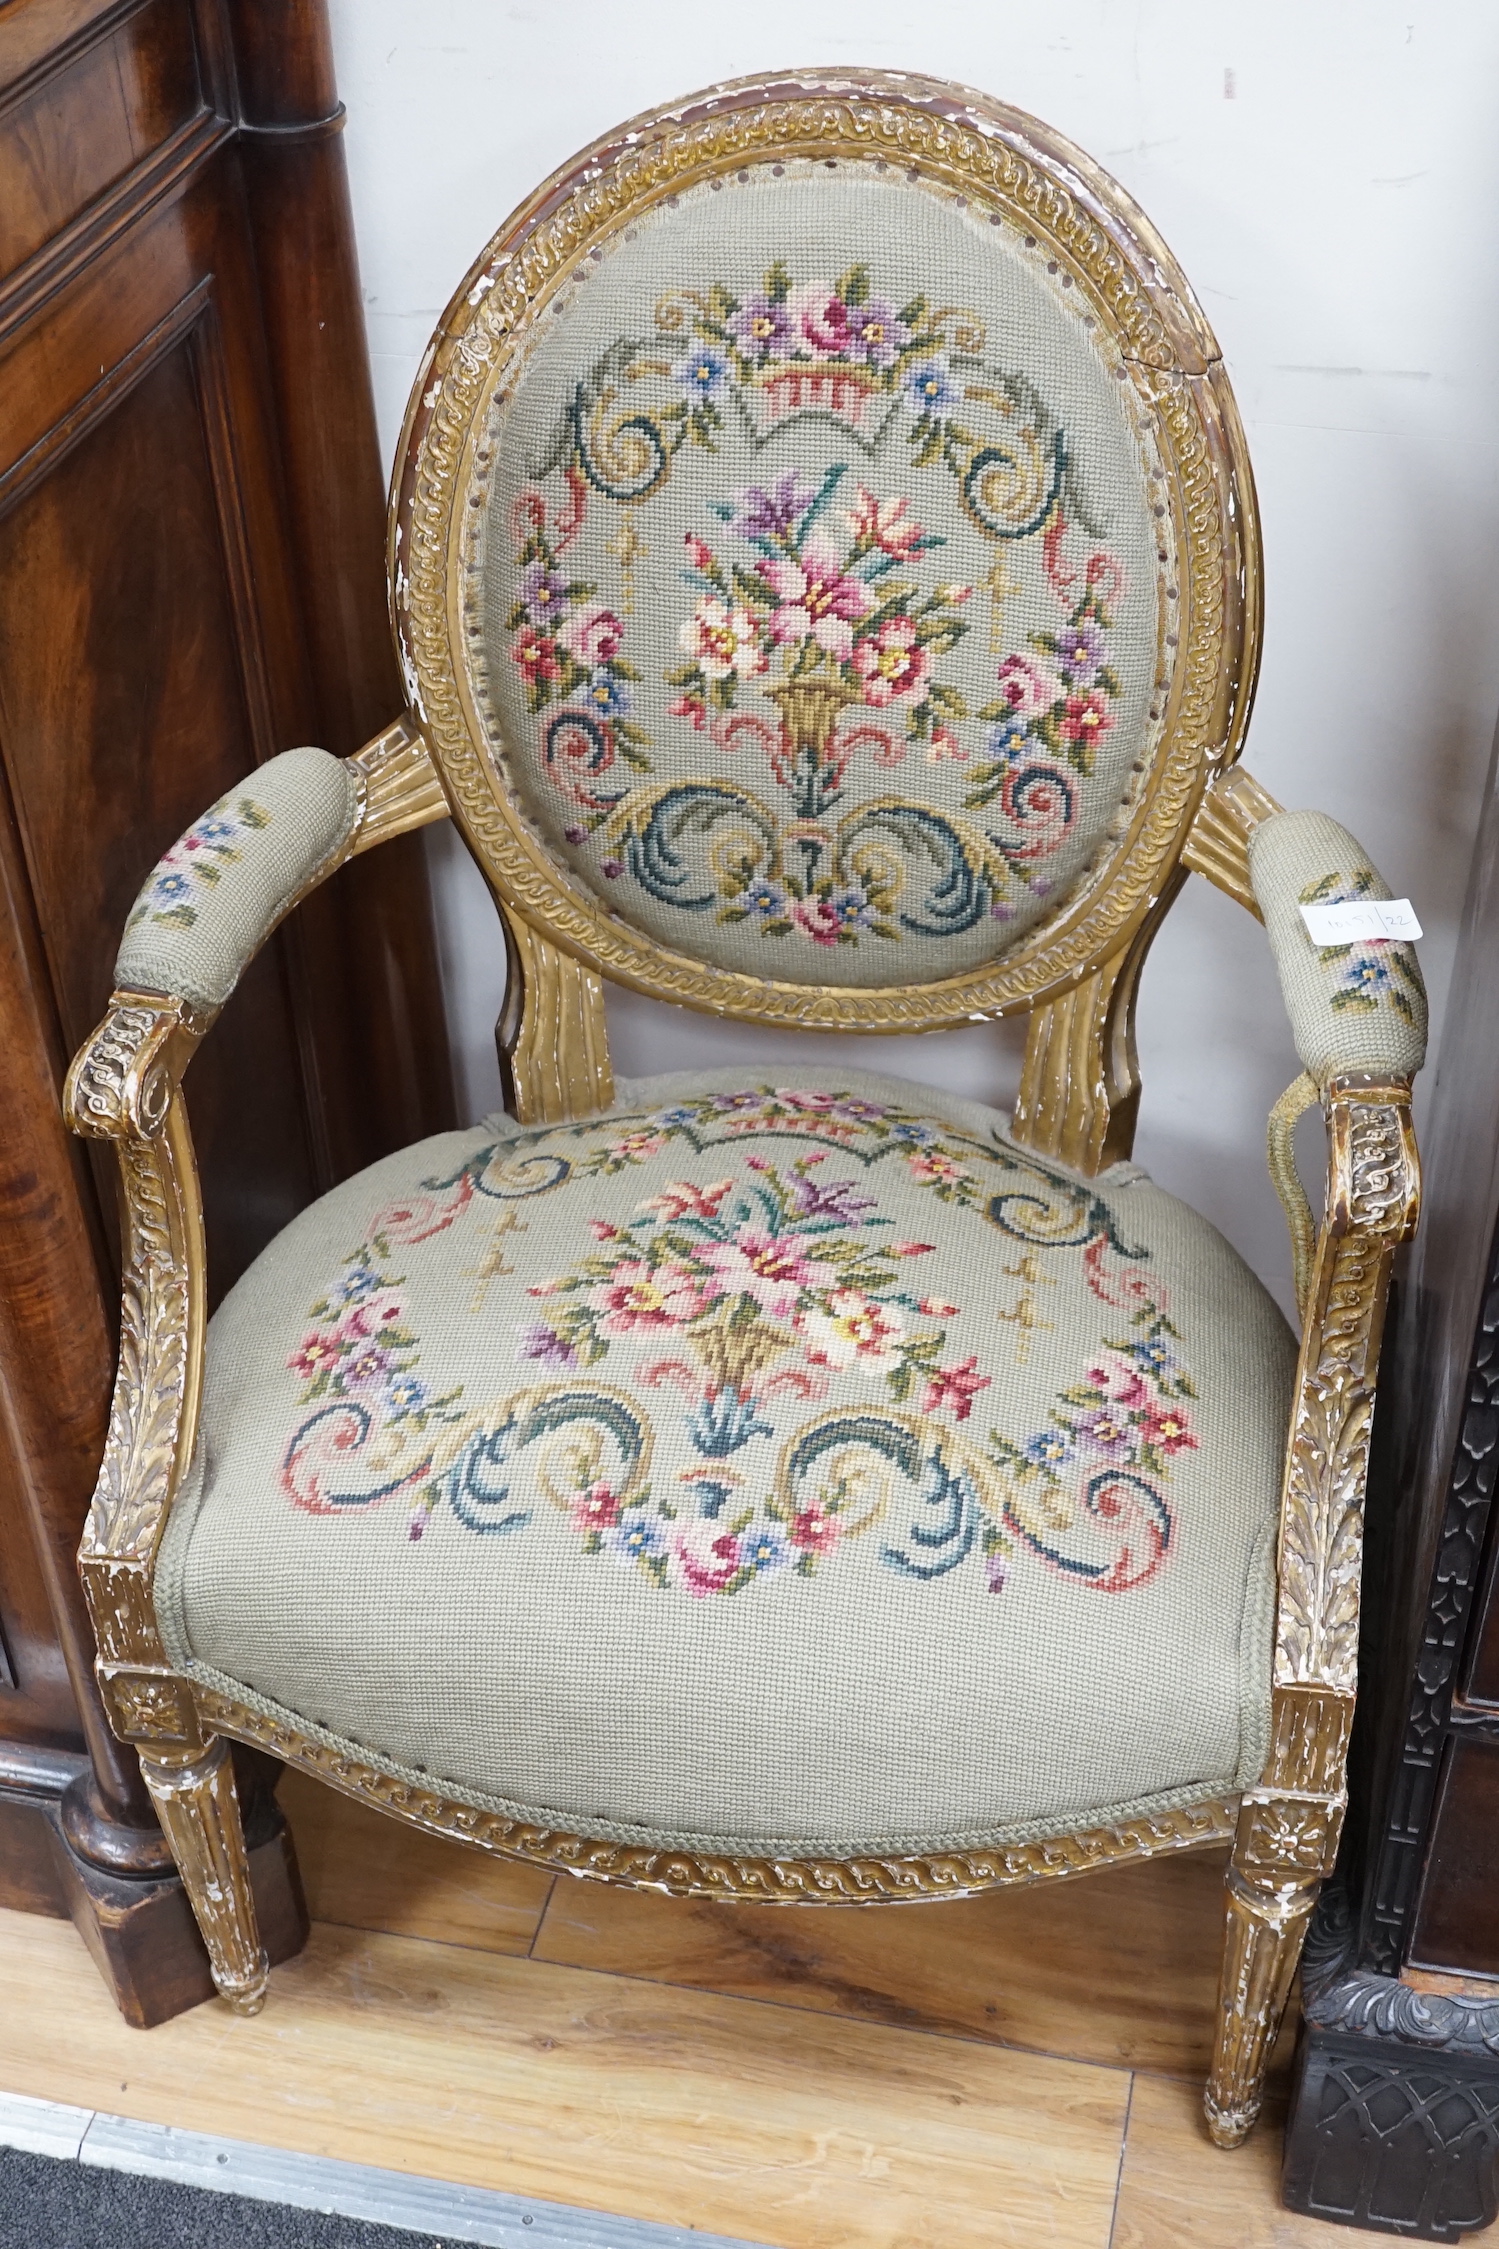 A 19th century French giltwood and composition fauteuil with tapestry upholstery, width 59cm, depth 46cm, height 90cm